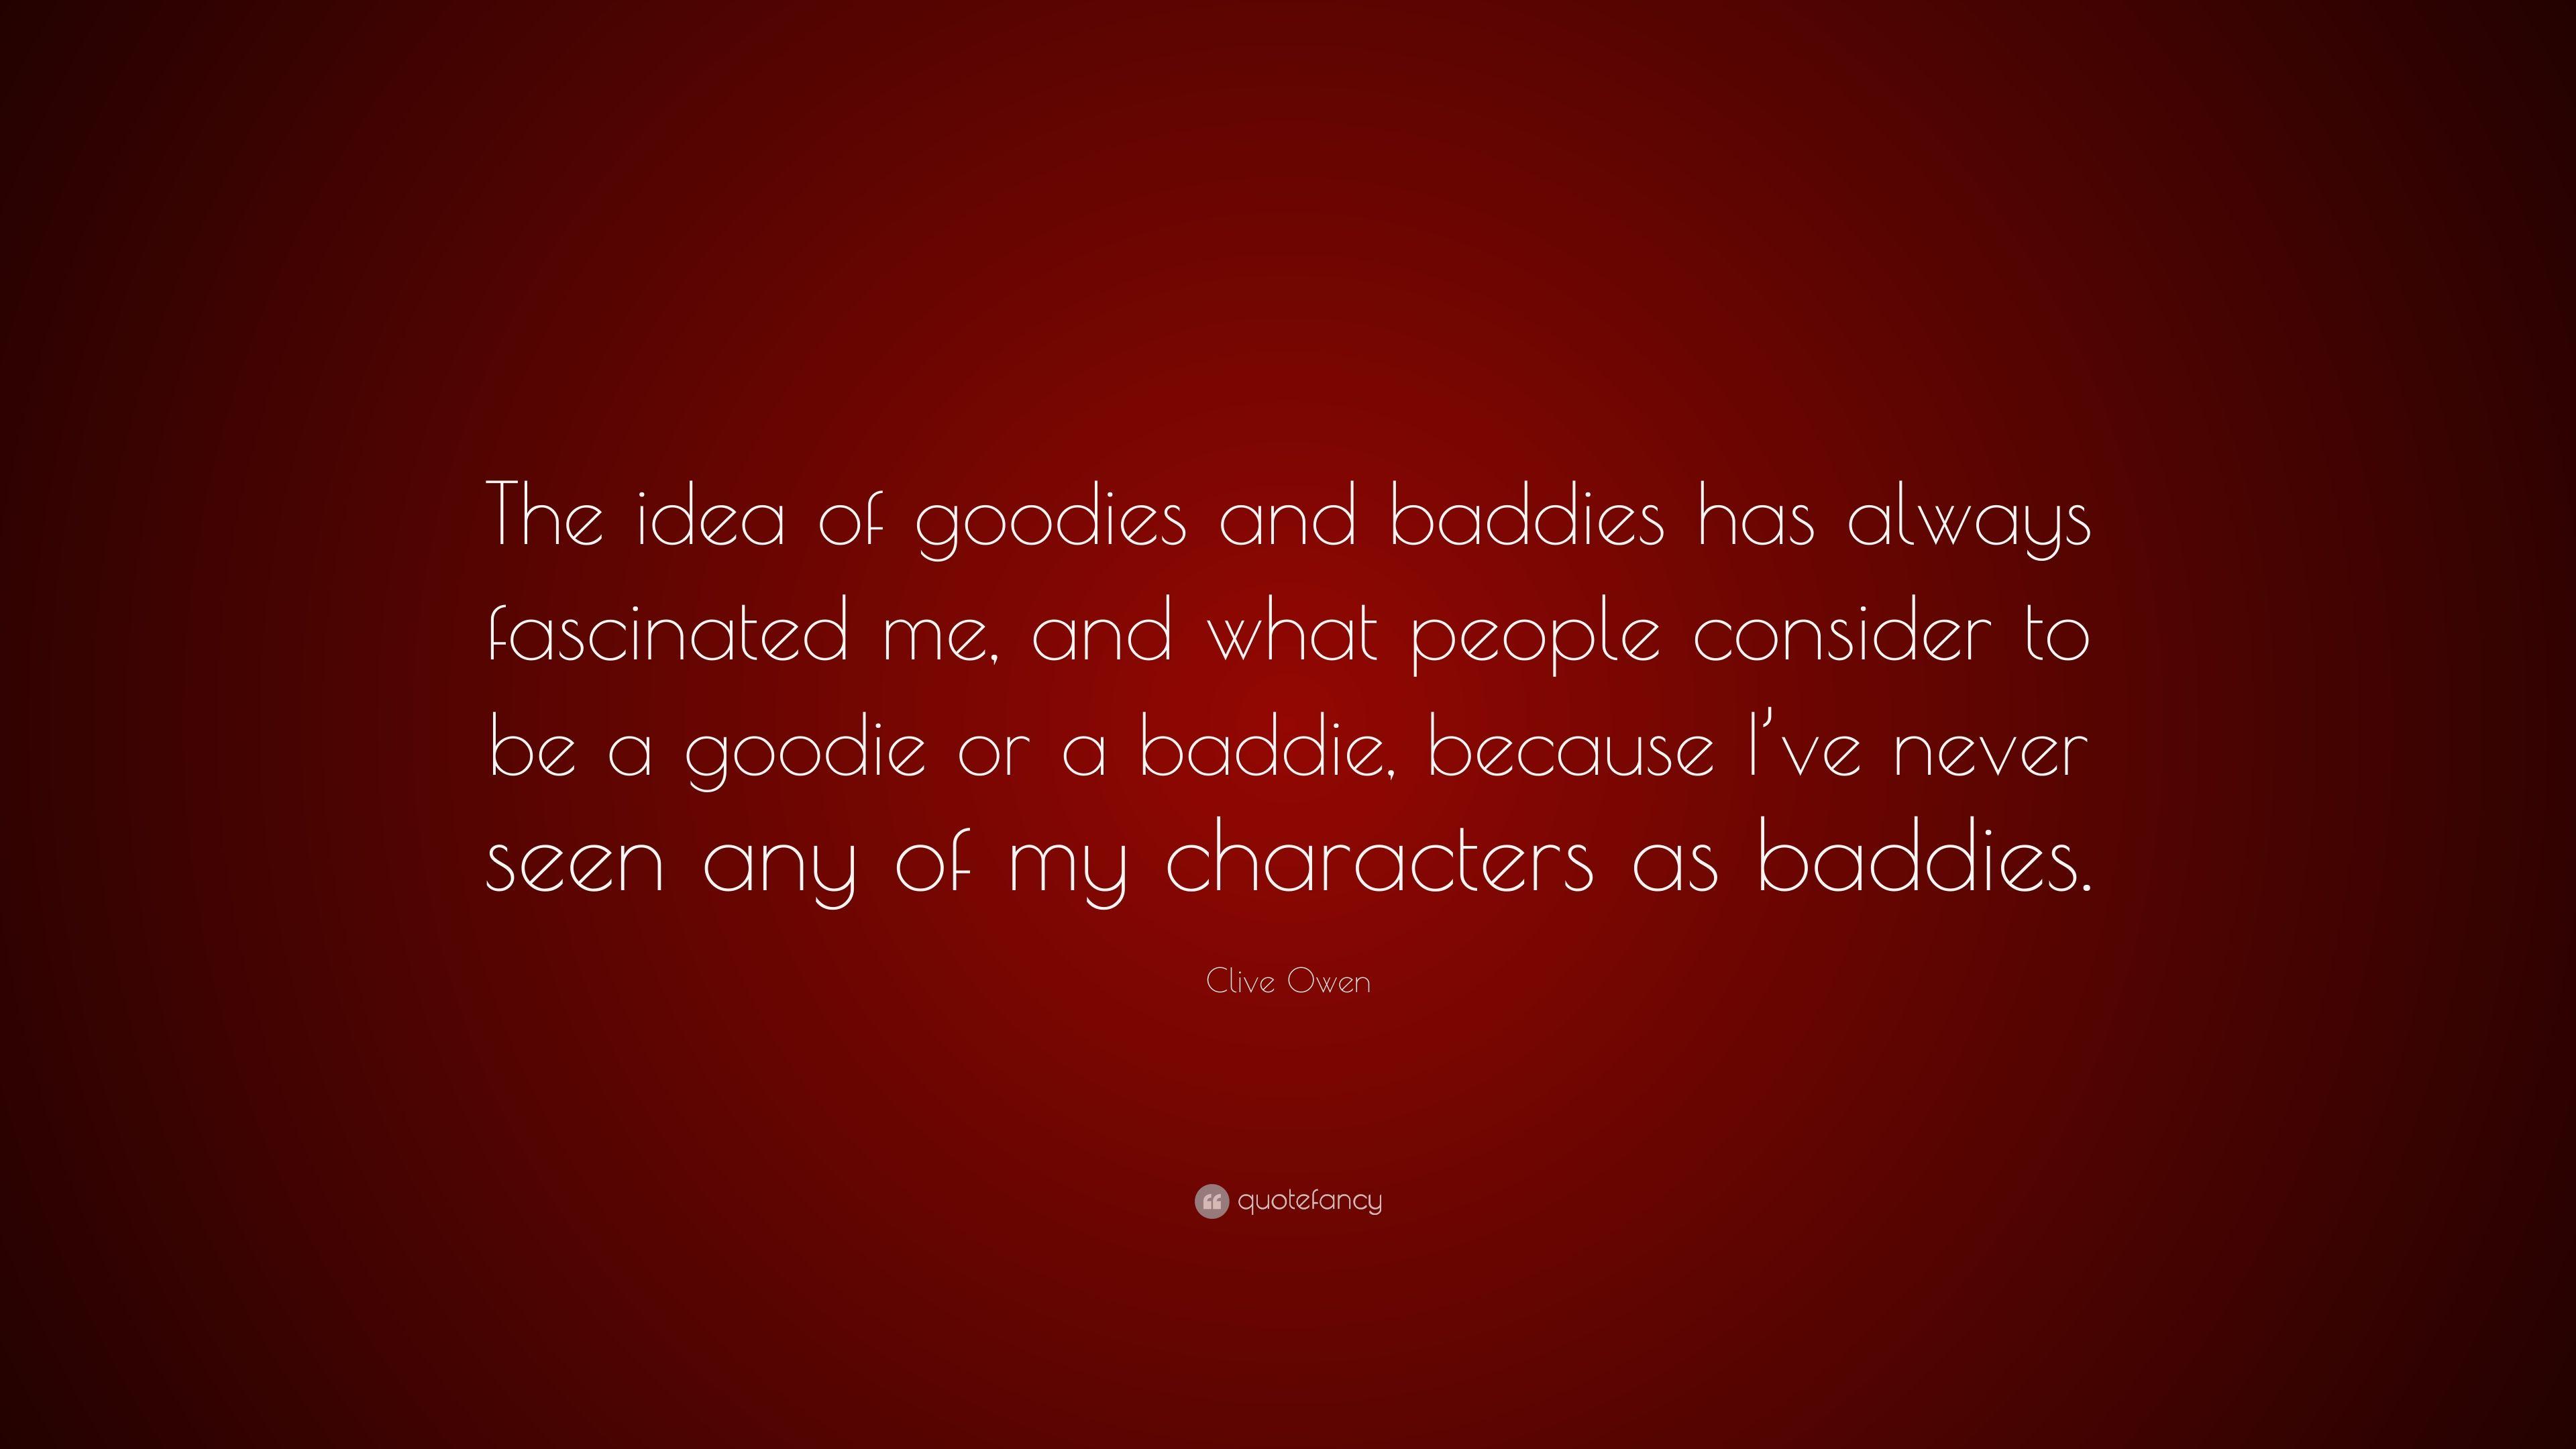 Clive Owen Quote: “The idea of goodies and baddies has